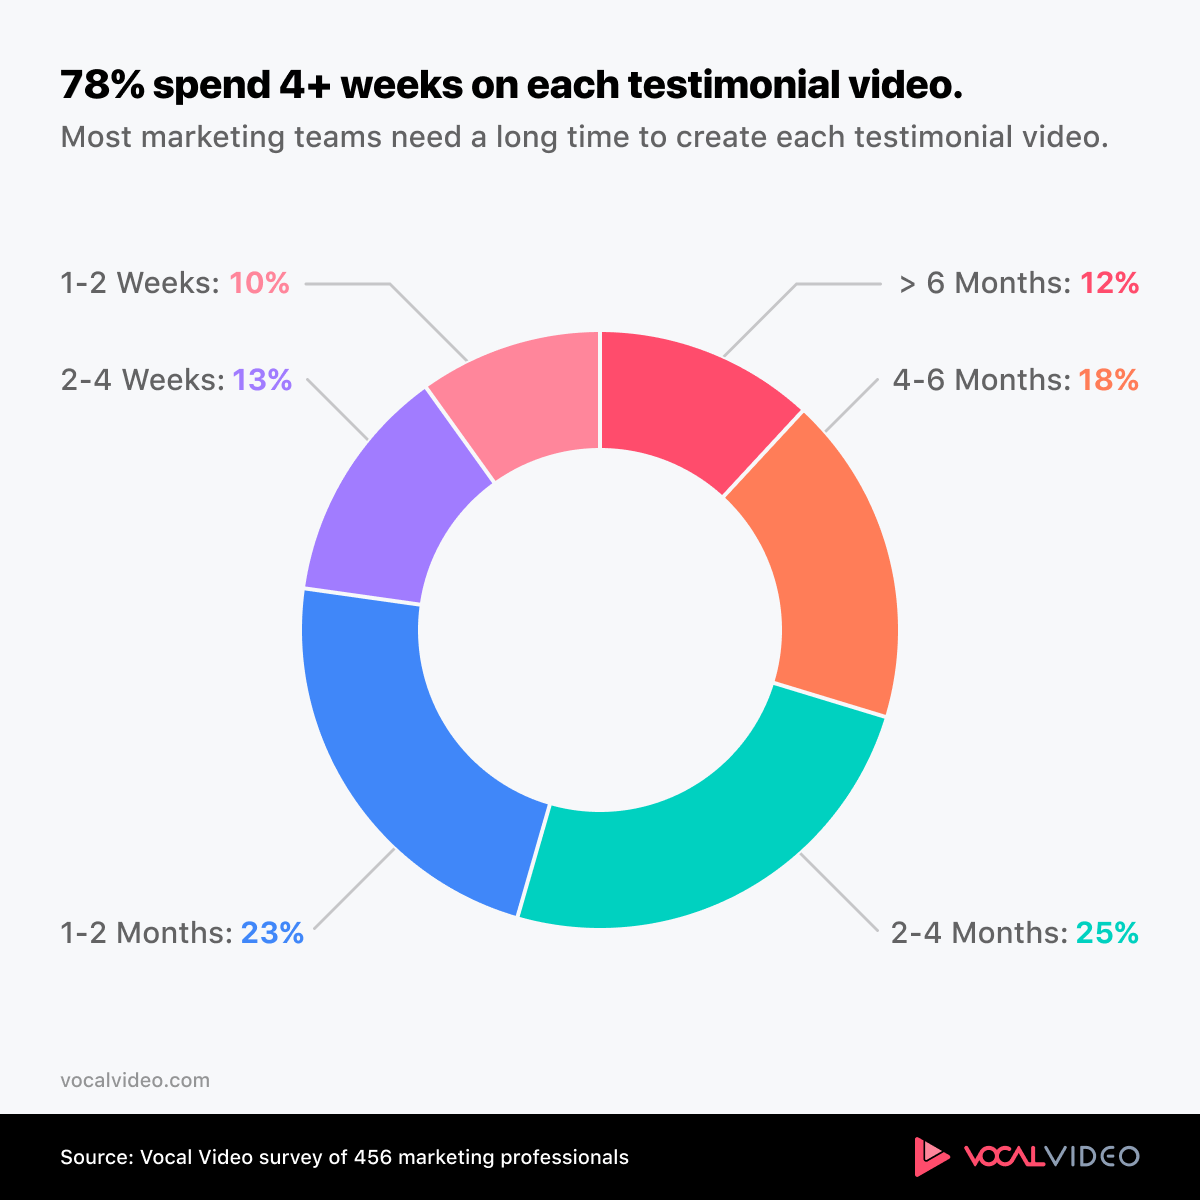 Chart showing most marketing teams need 4+ weeks to create testimonial videos.